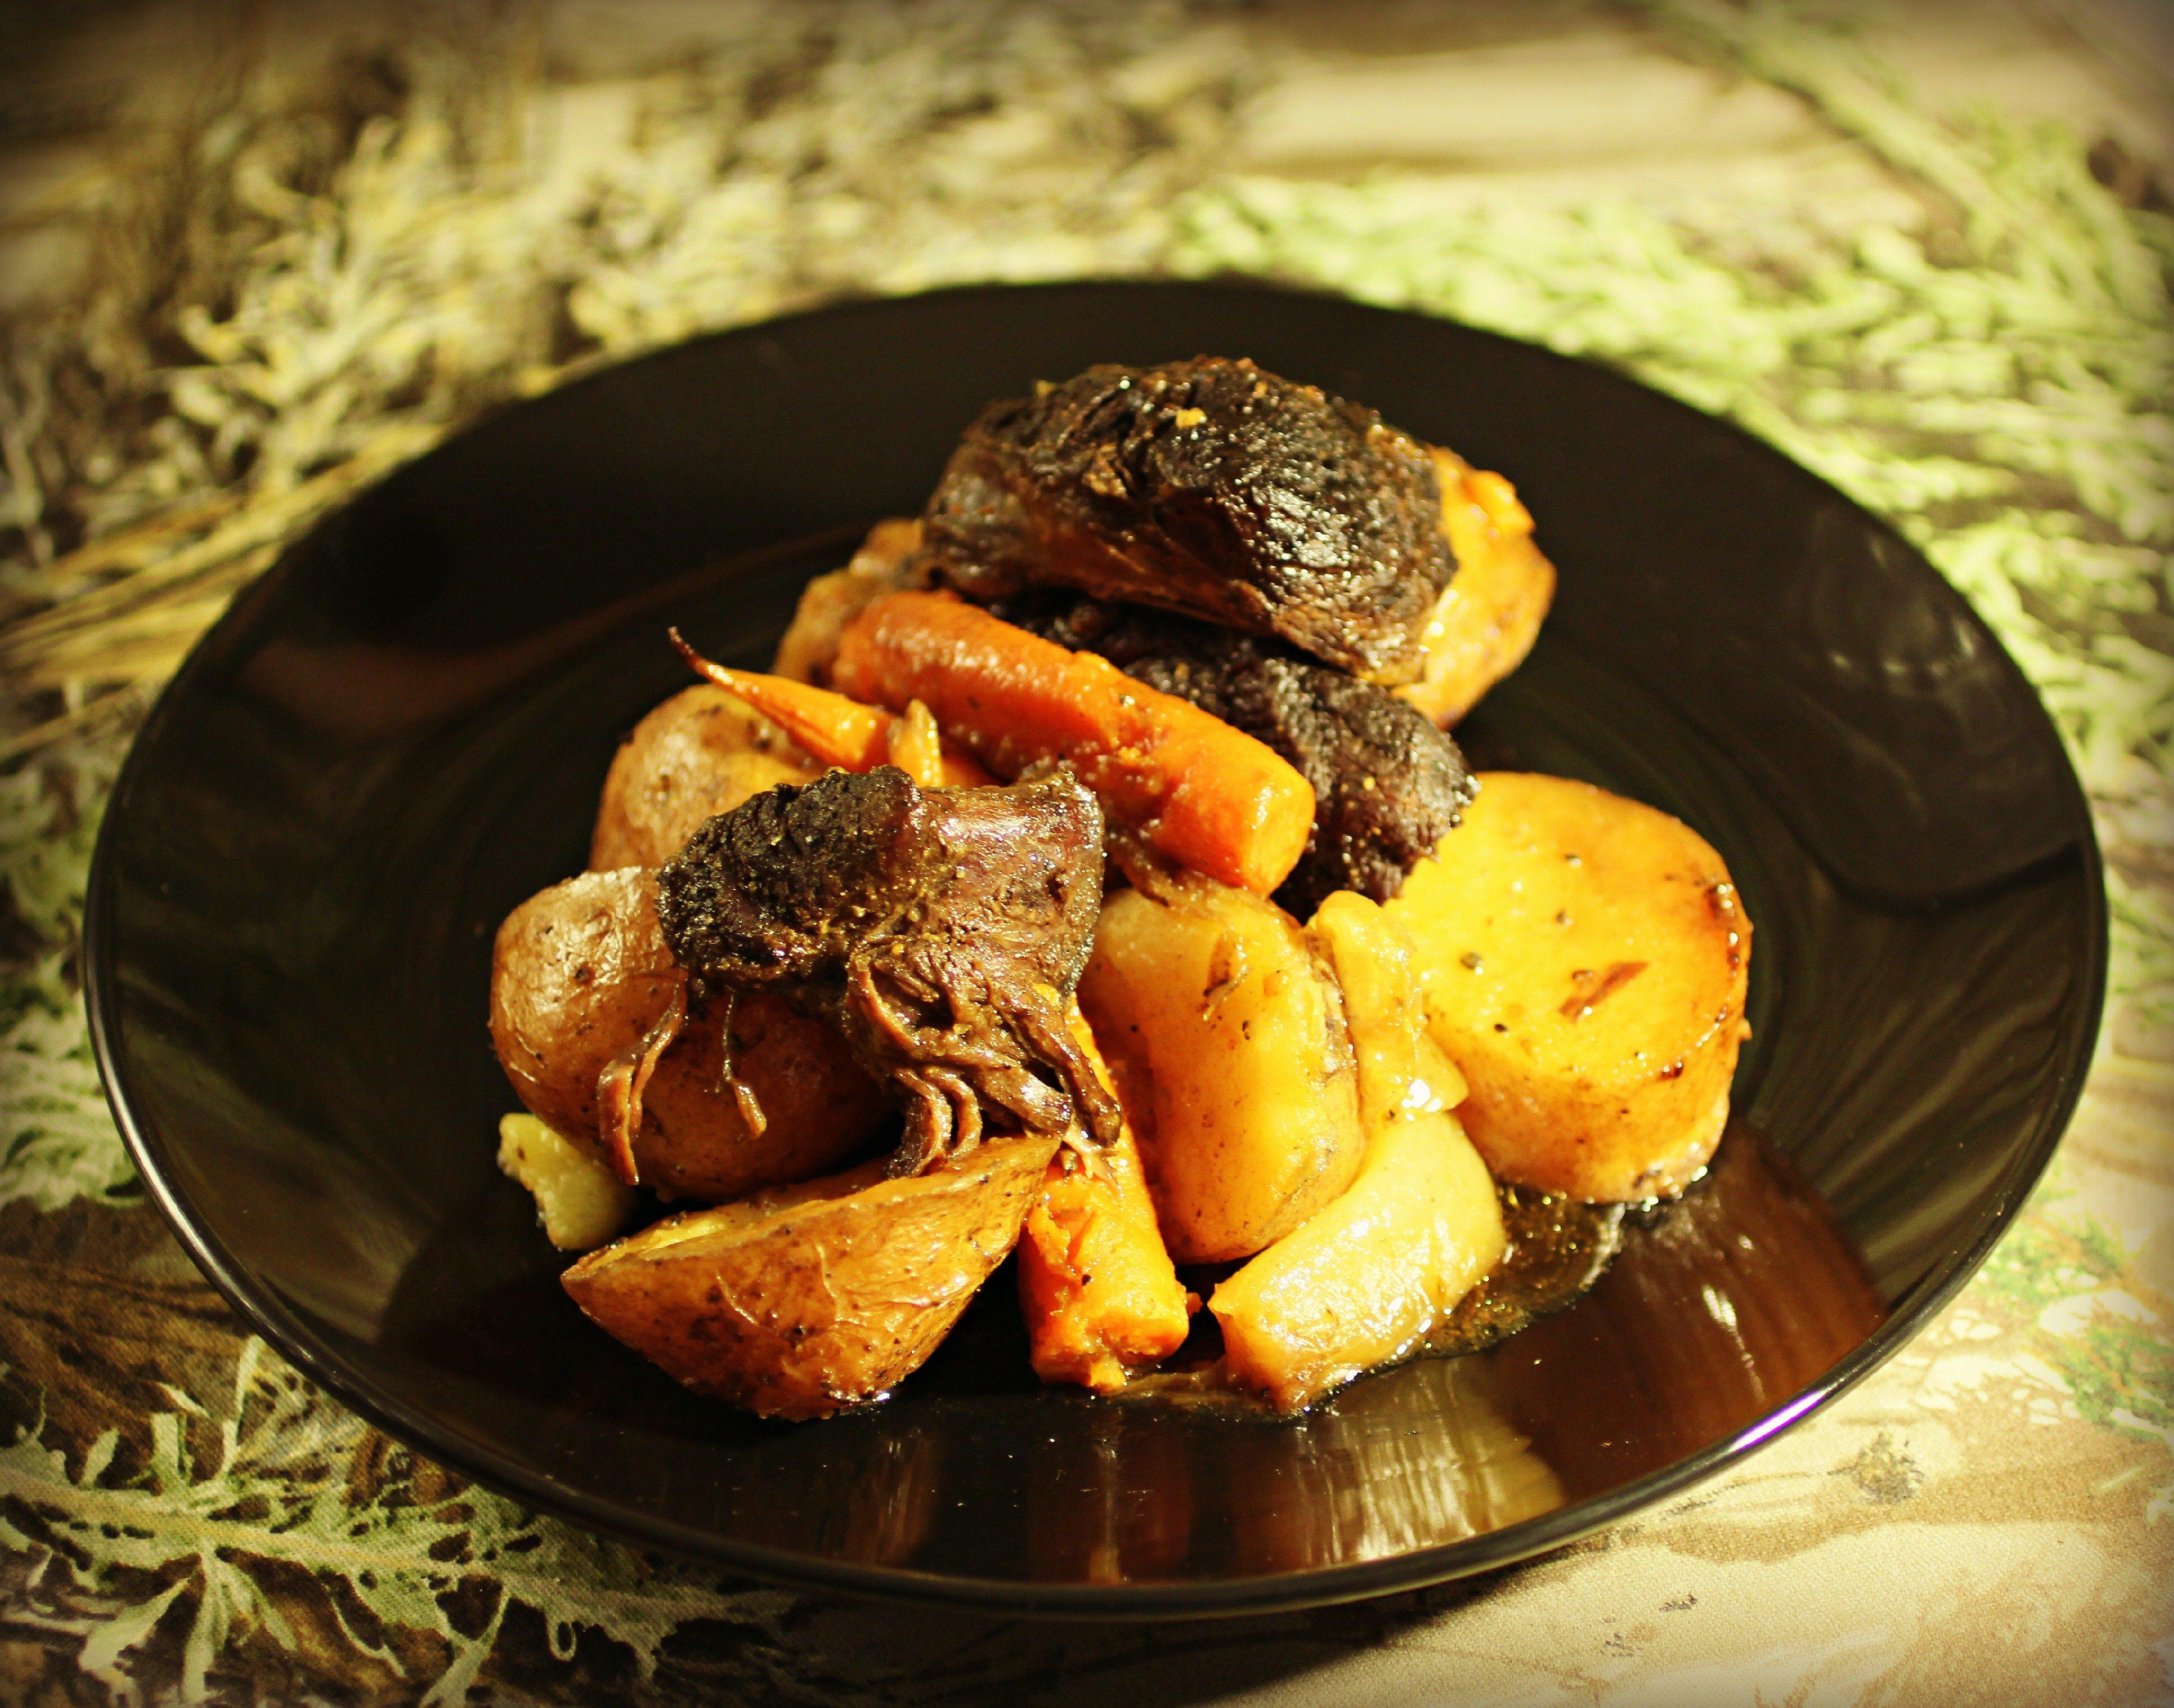 Slow roasted elk round with carrots, potatoes and onions.